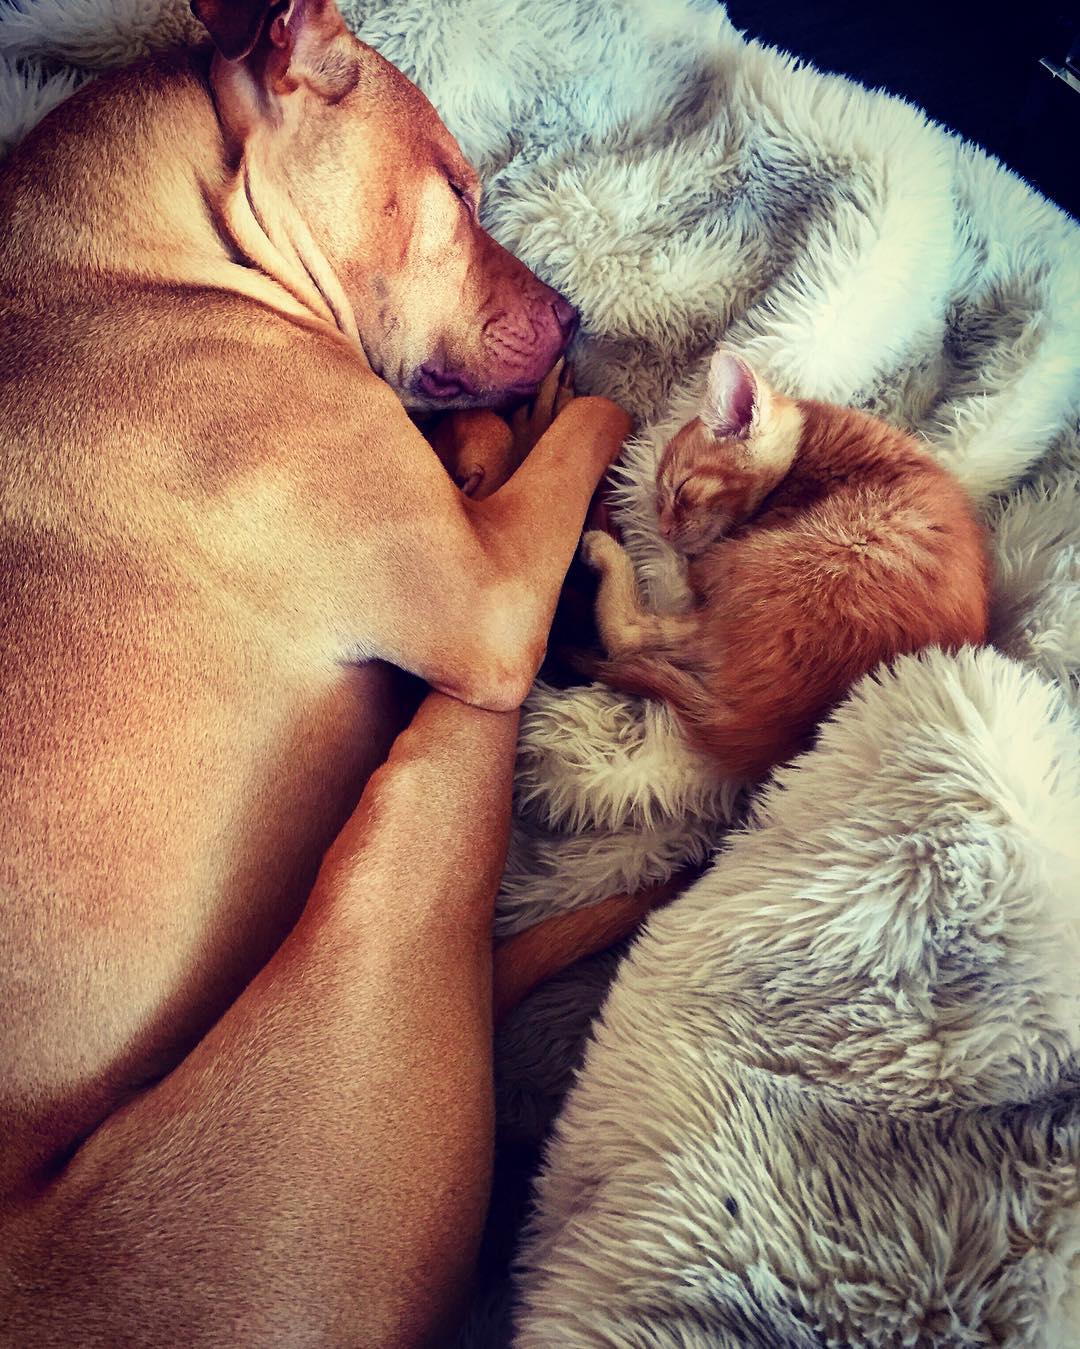 Rescued pit bull made friends with a kitten 05